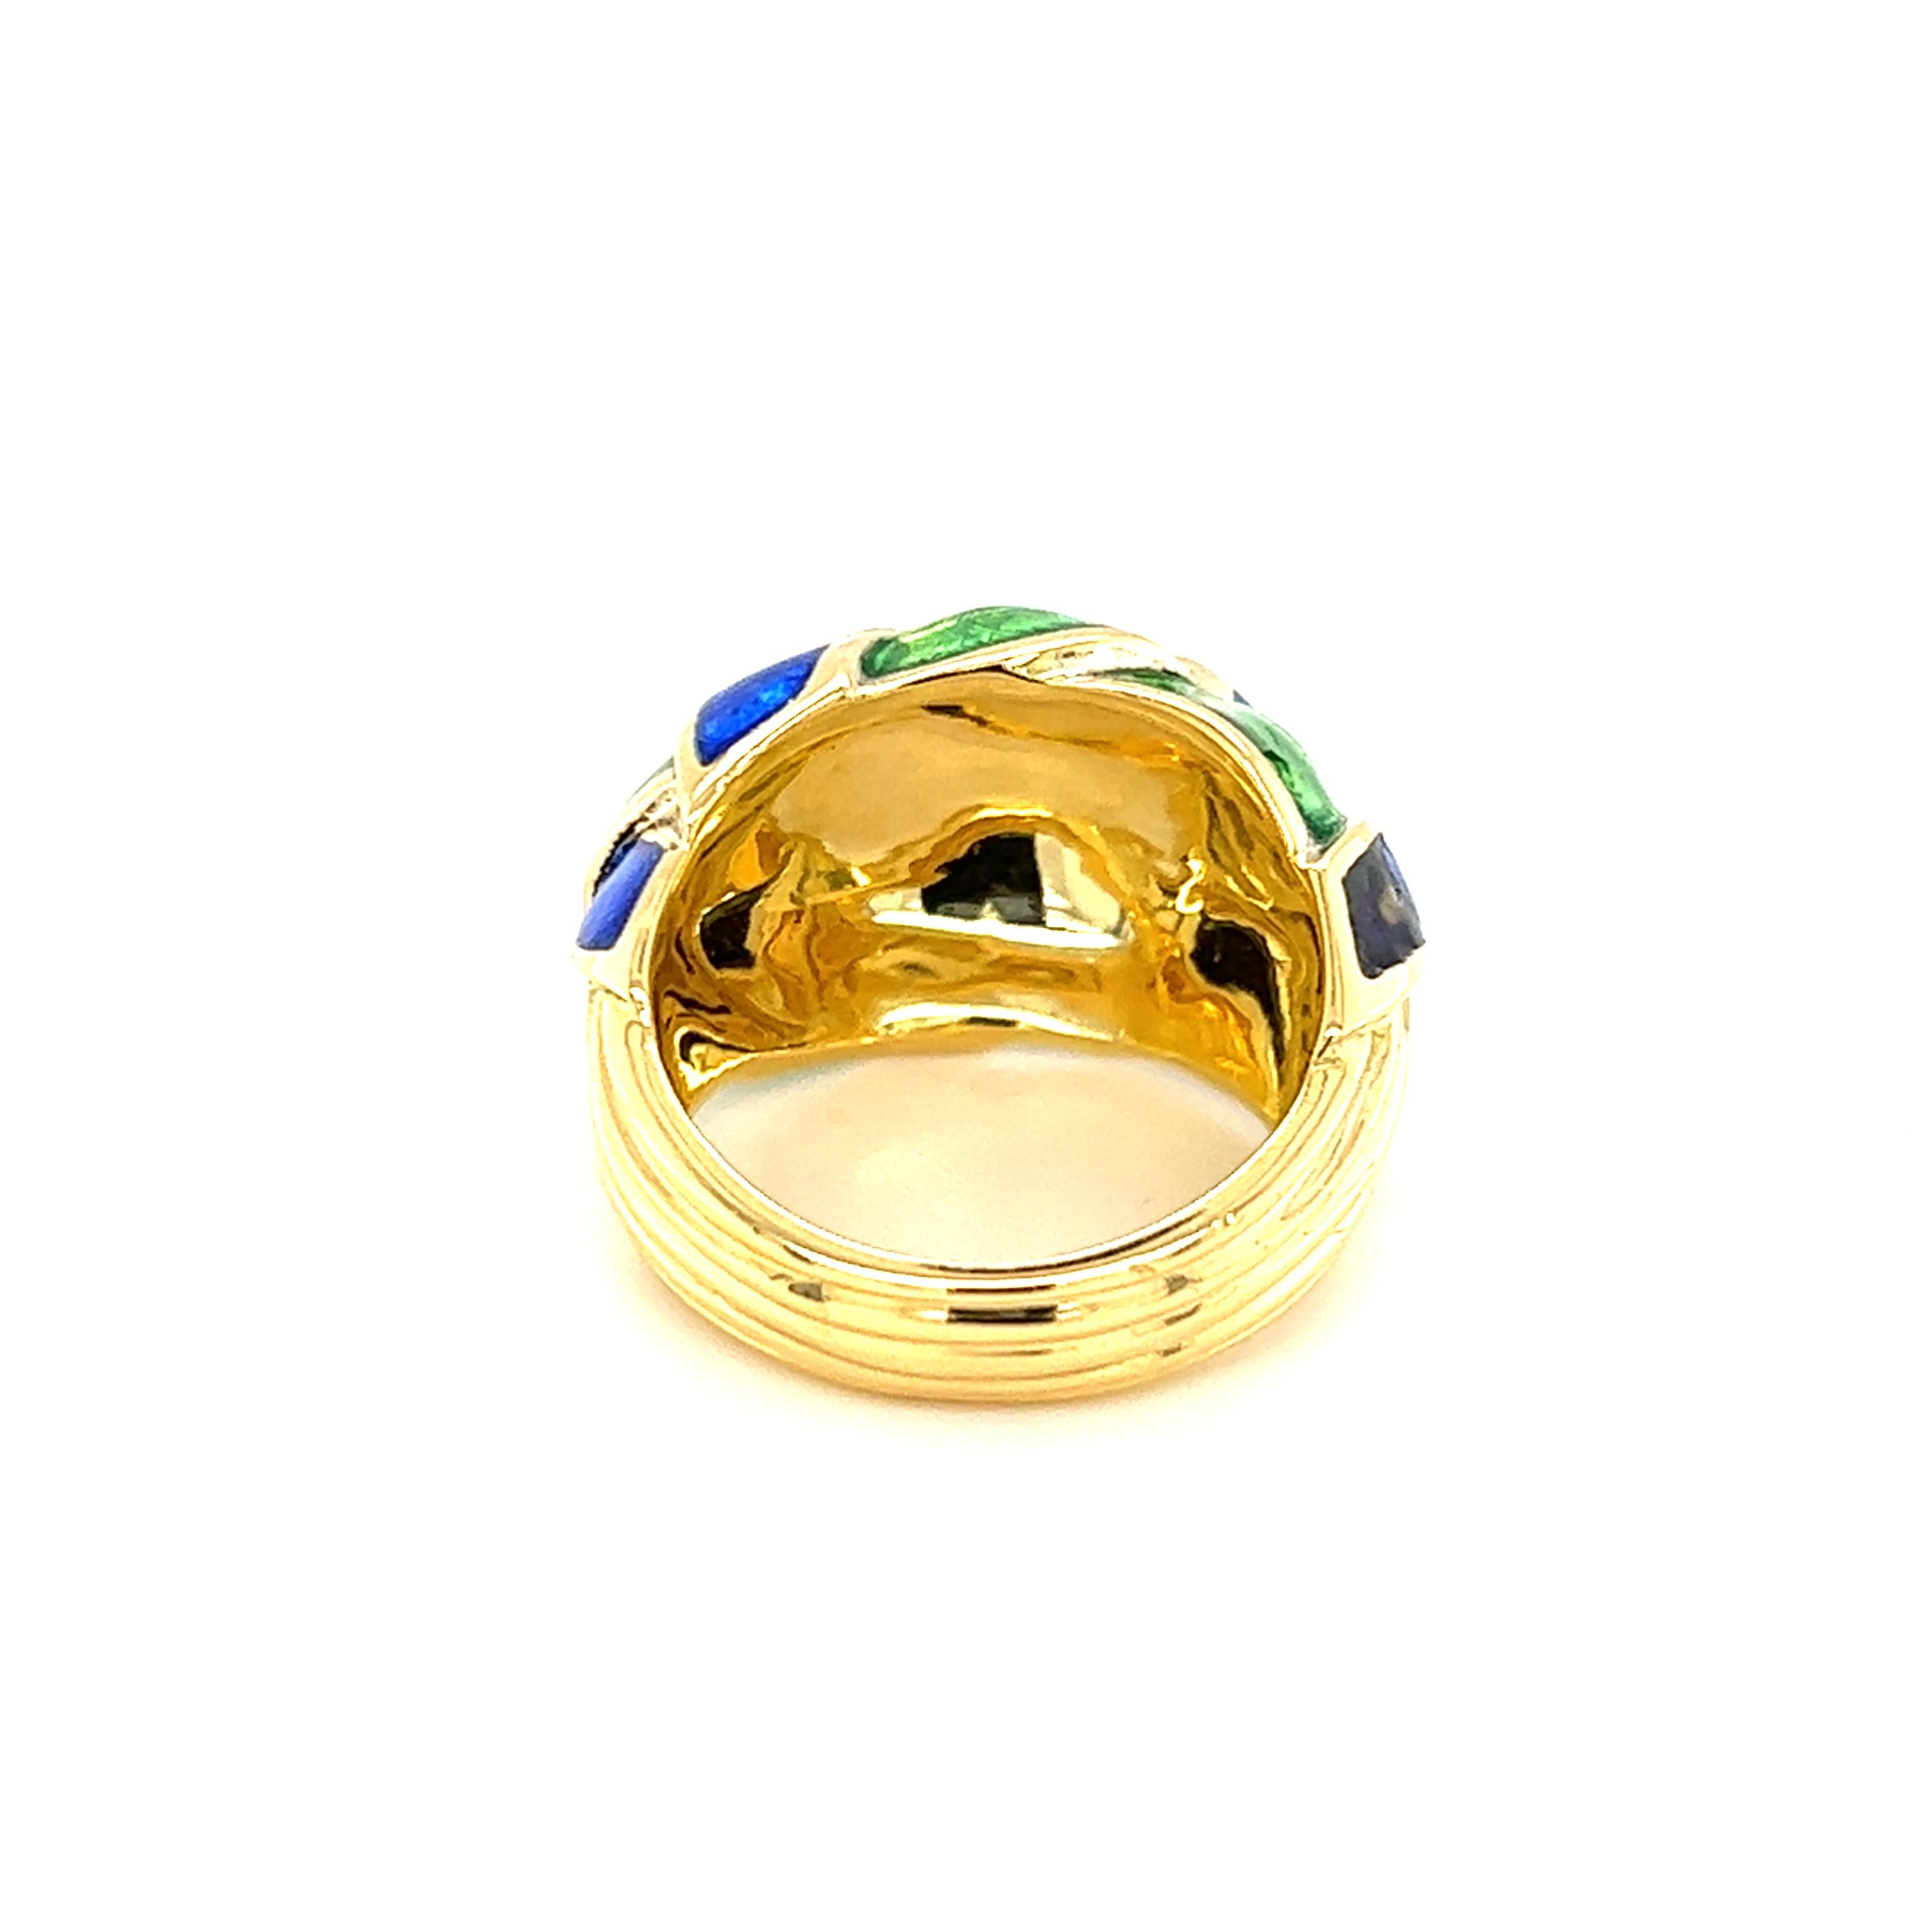 Jean Schlumberger for Tiffany & Co. Enamel Woven Knot Dome Ring 1